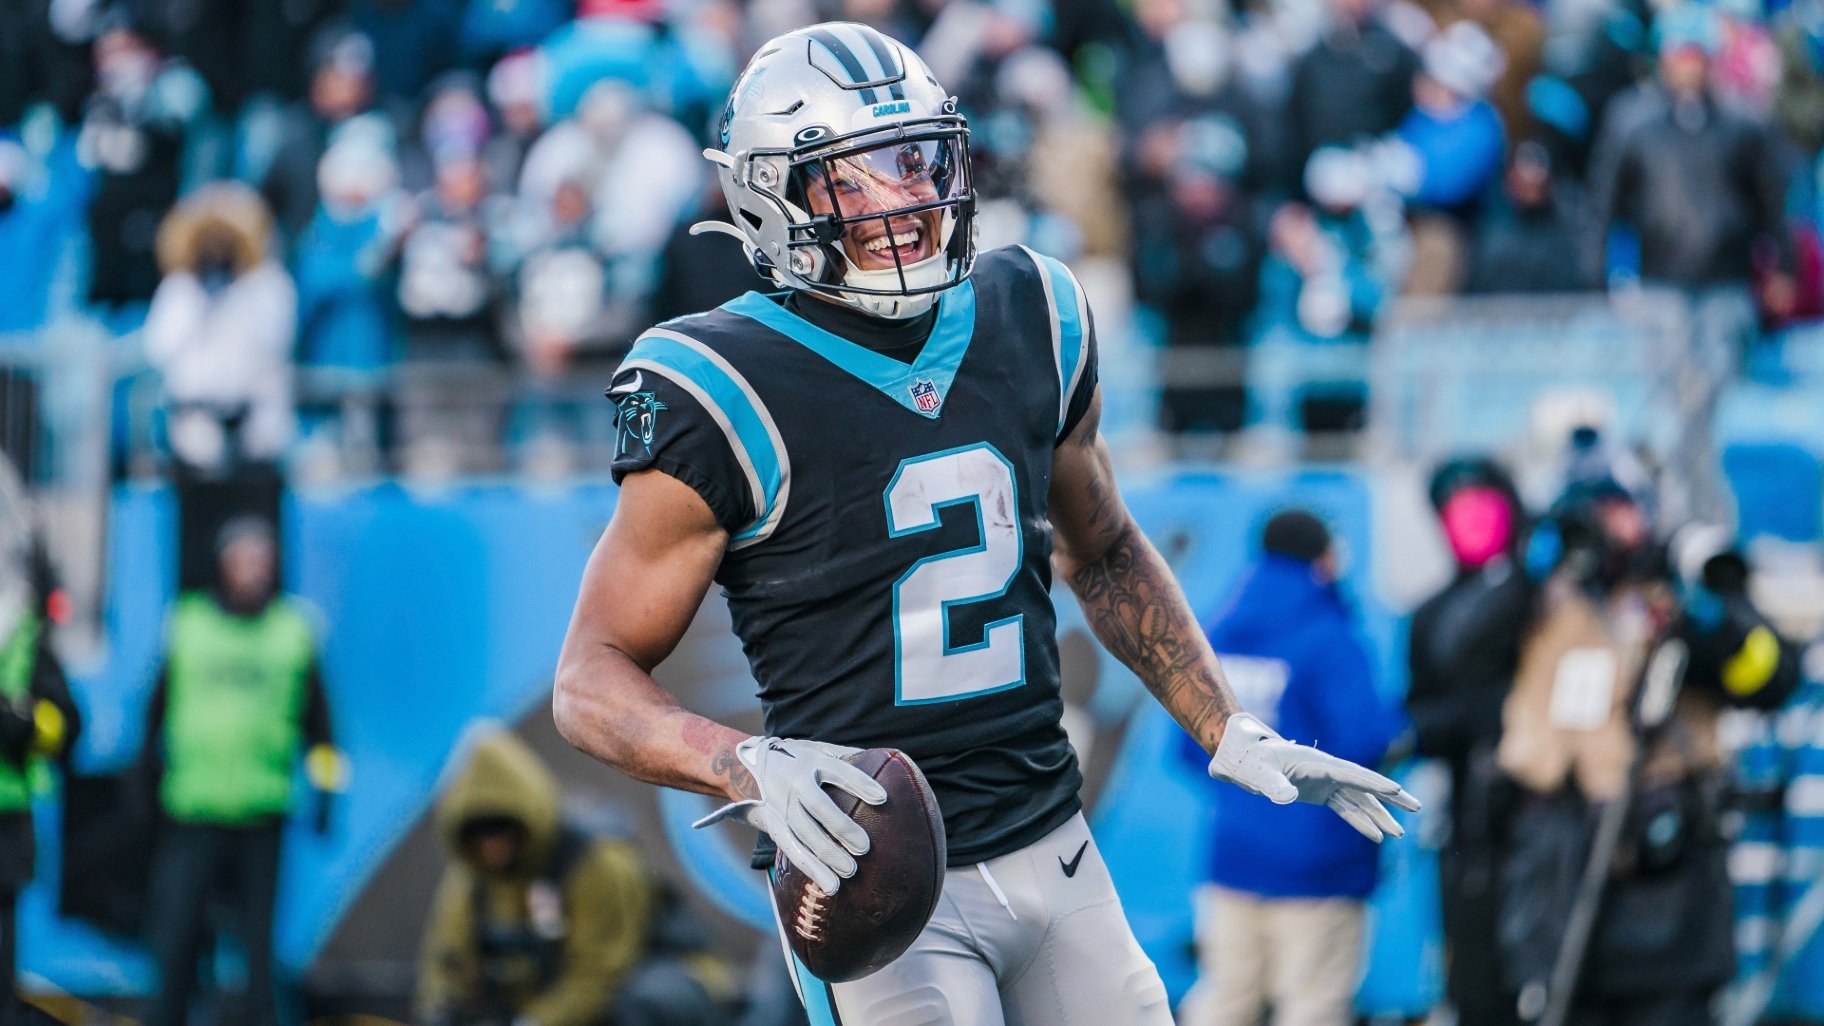 Panthers set to update uniforms ahead of 2023 NFL Draft